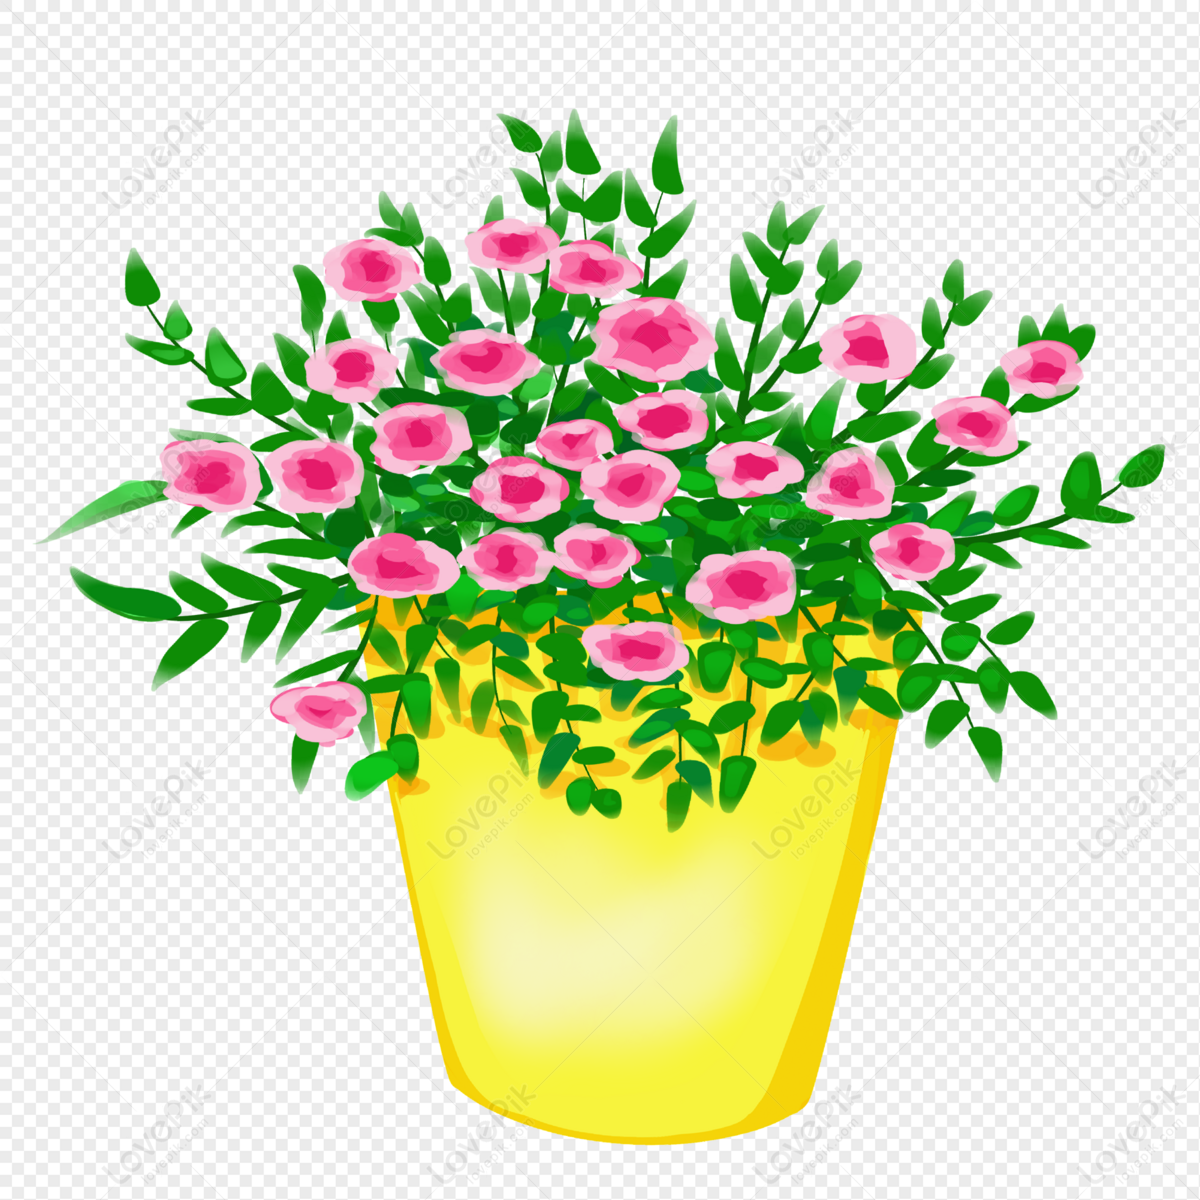 Cartoon Pot Of Pink Flowers PNG Hd Transparent Image And Clipart Image For  Free Download - Lovepik | 401534084